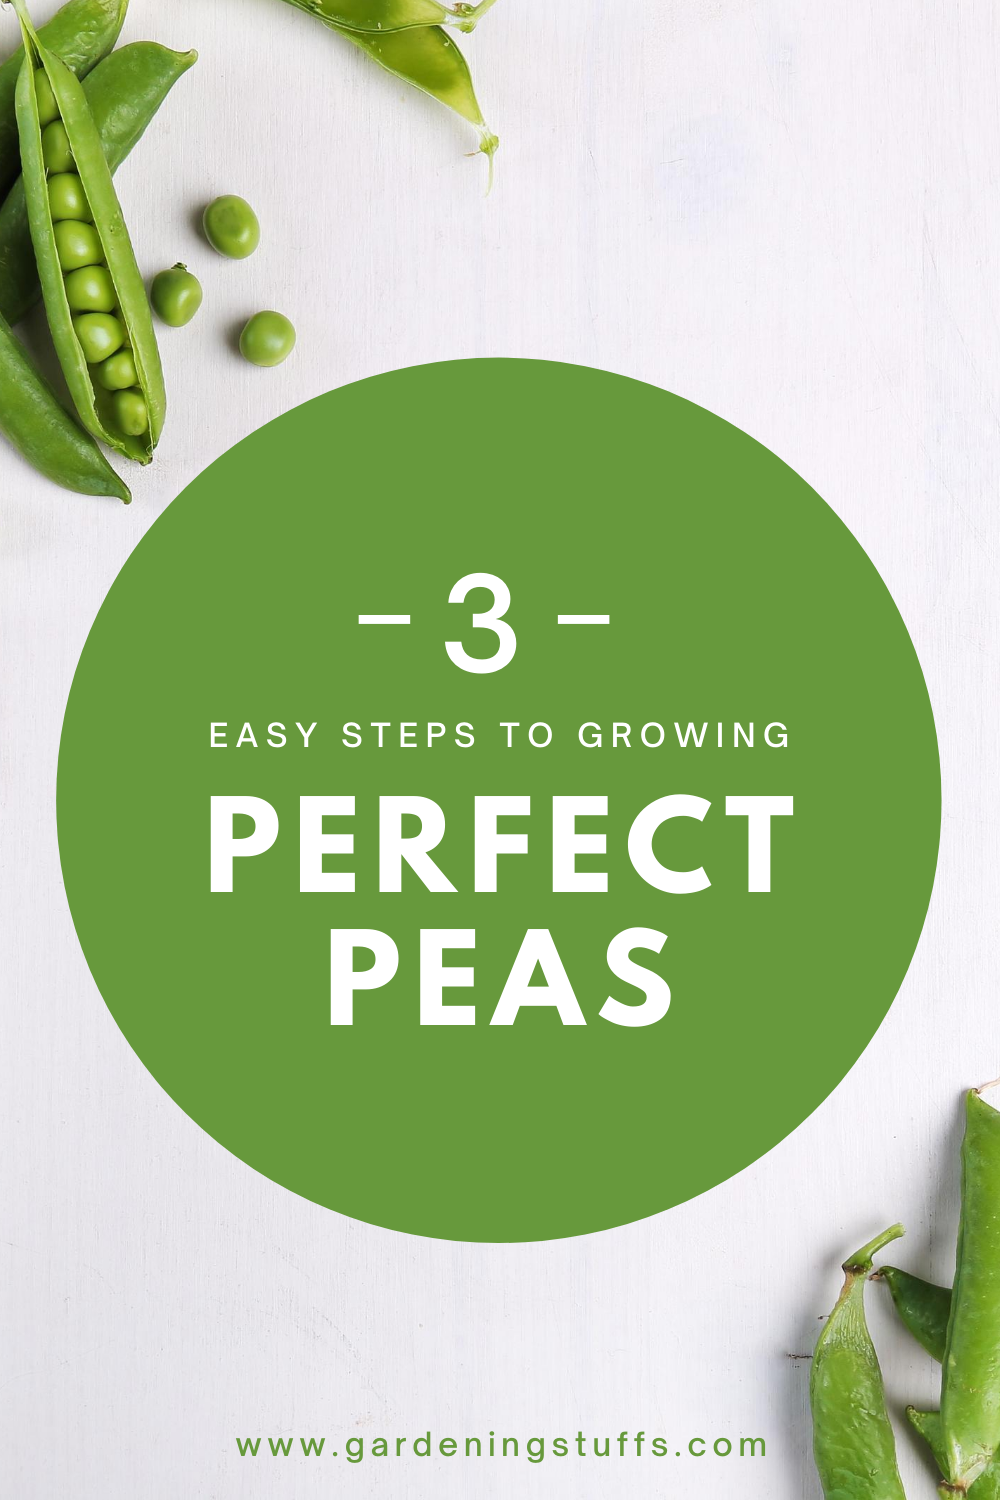 Pea plants are really easy to grow and care for. Let’s go through these 3 easy steps it takes to plant, care for and harvest your peas.